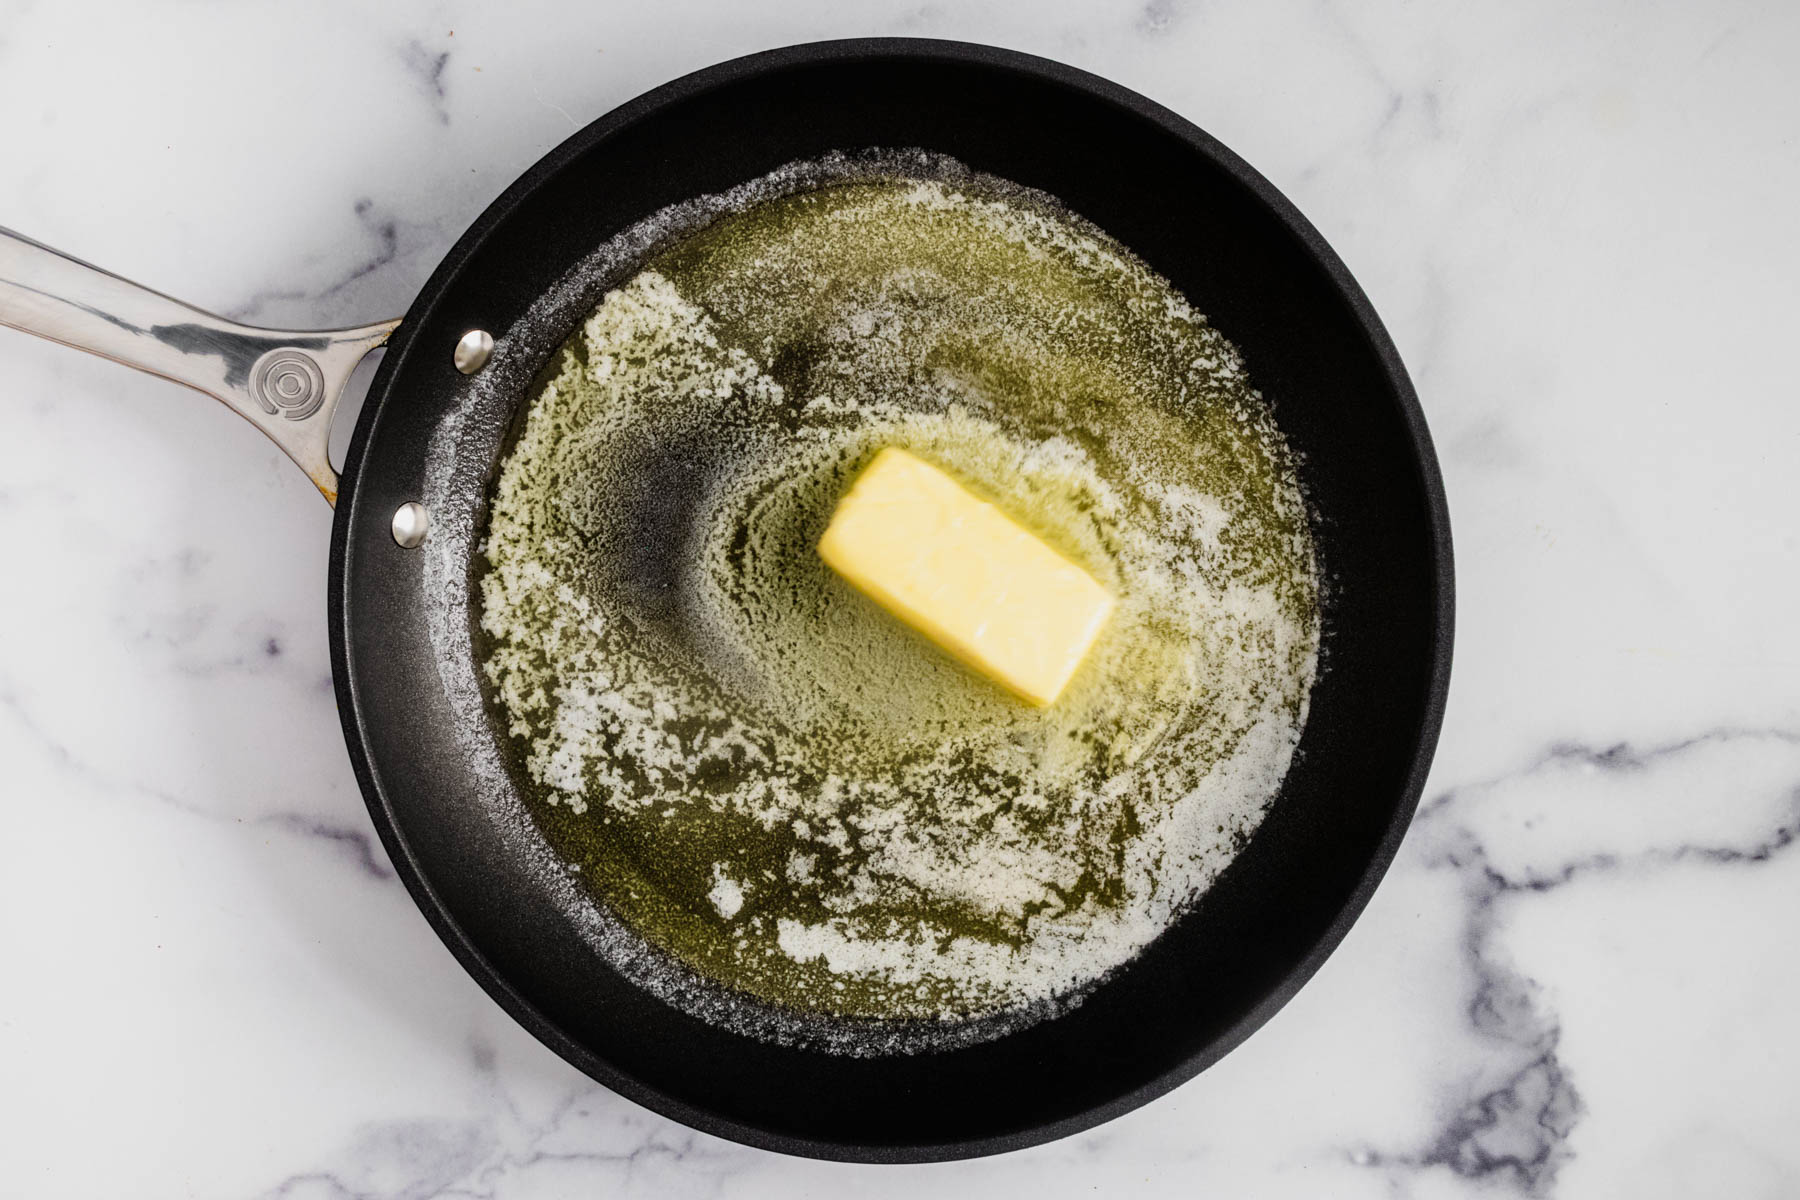 A stick of butter melting in a large skillet.